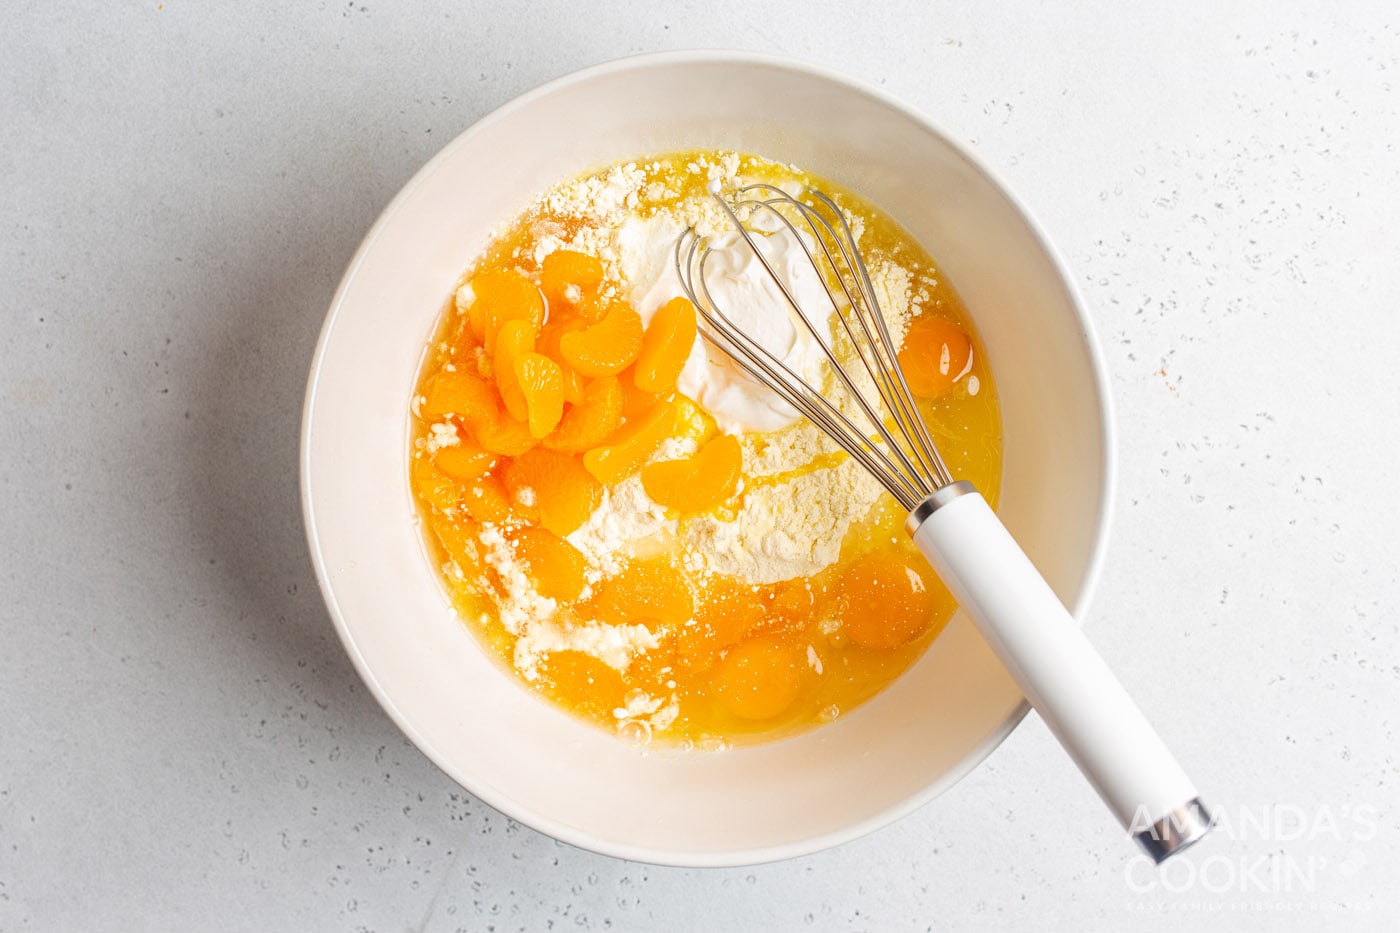 yellow cake mix, vegetable oil, sour cream, eggs, and mandarin oranges in a mixing bowl